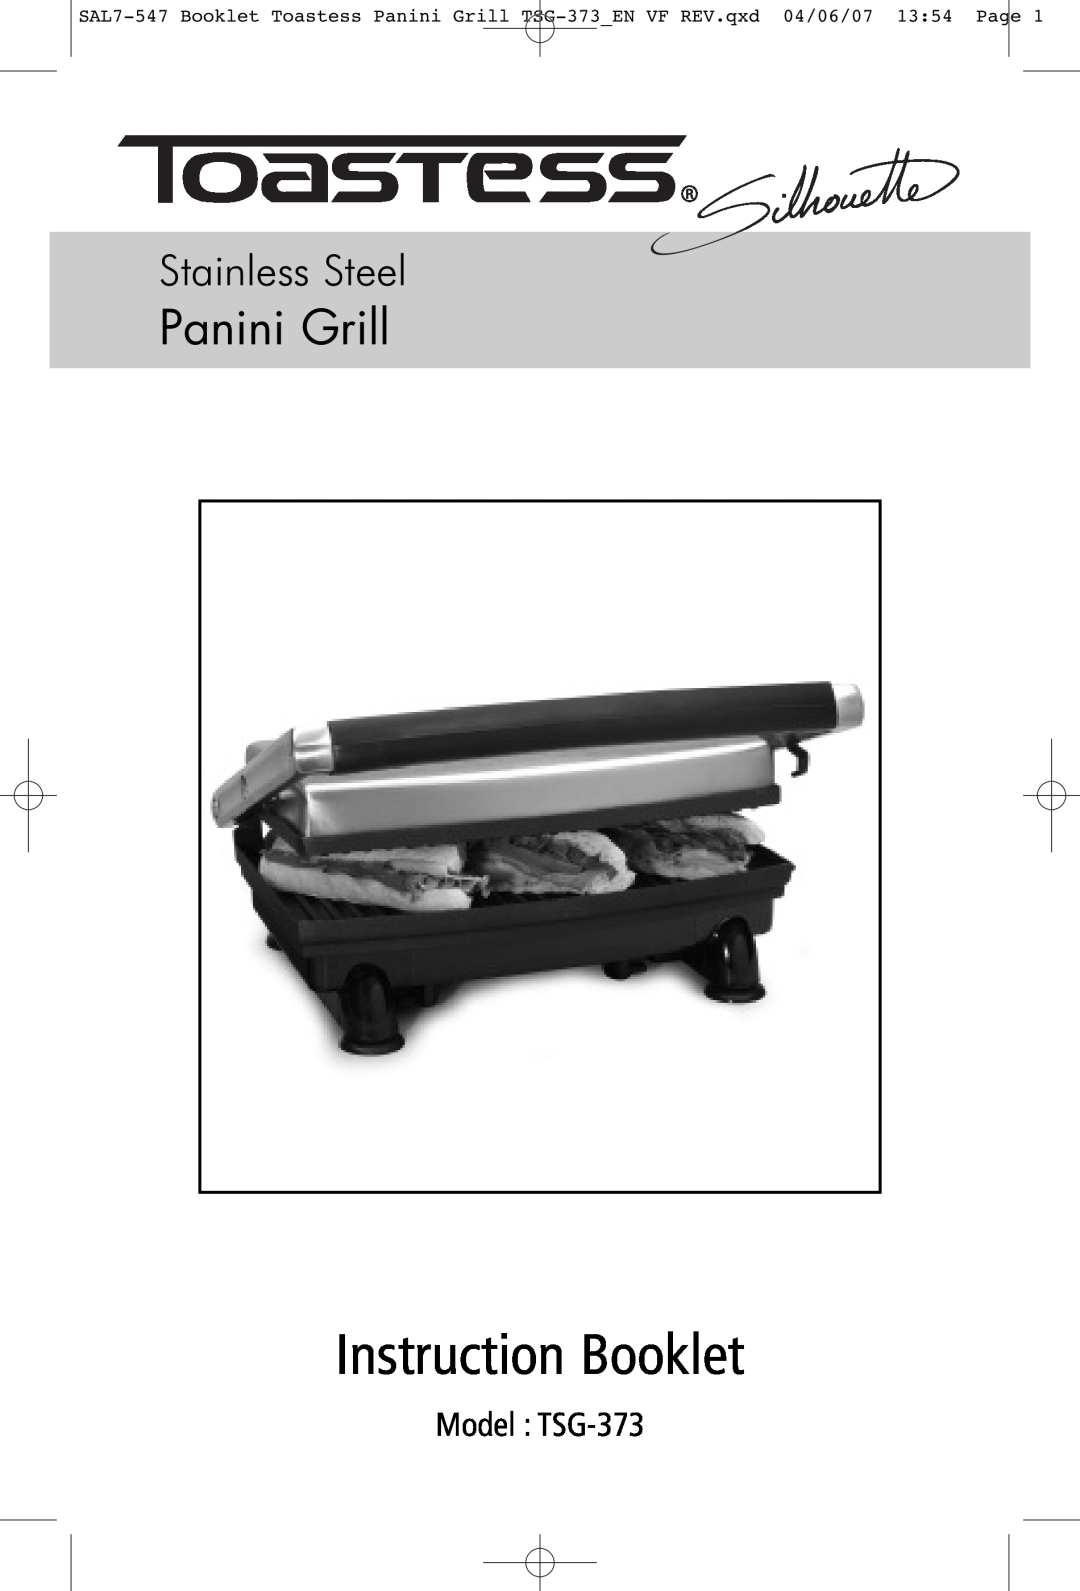 Toastess manual Model TSG-373, Instruction Booklet, Panini Grill, Stainless Steel 